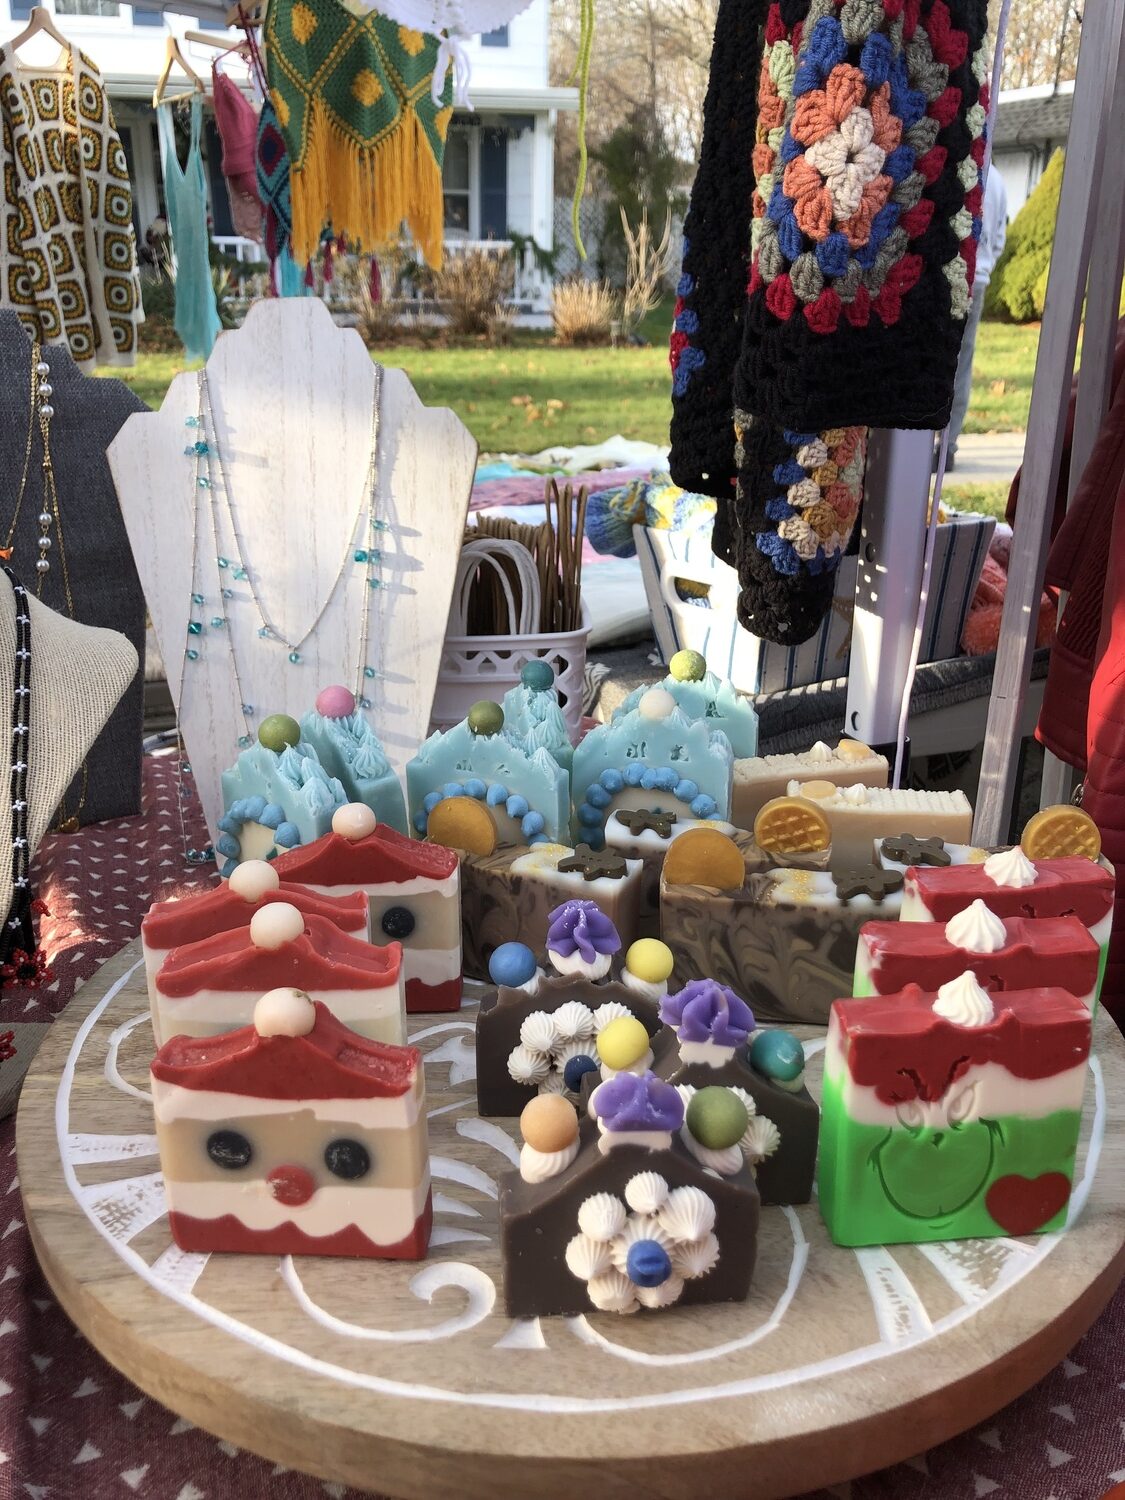 Holiday themed handmade soaps offered for sale last year at the inaugural 